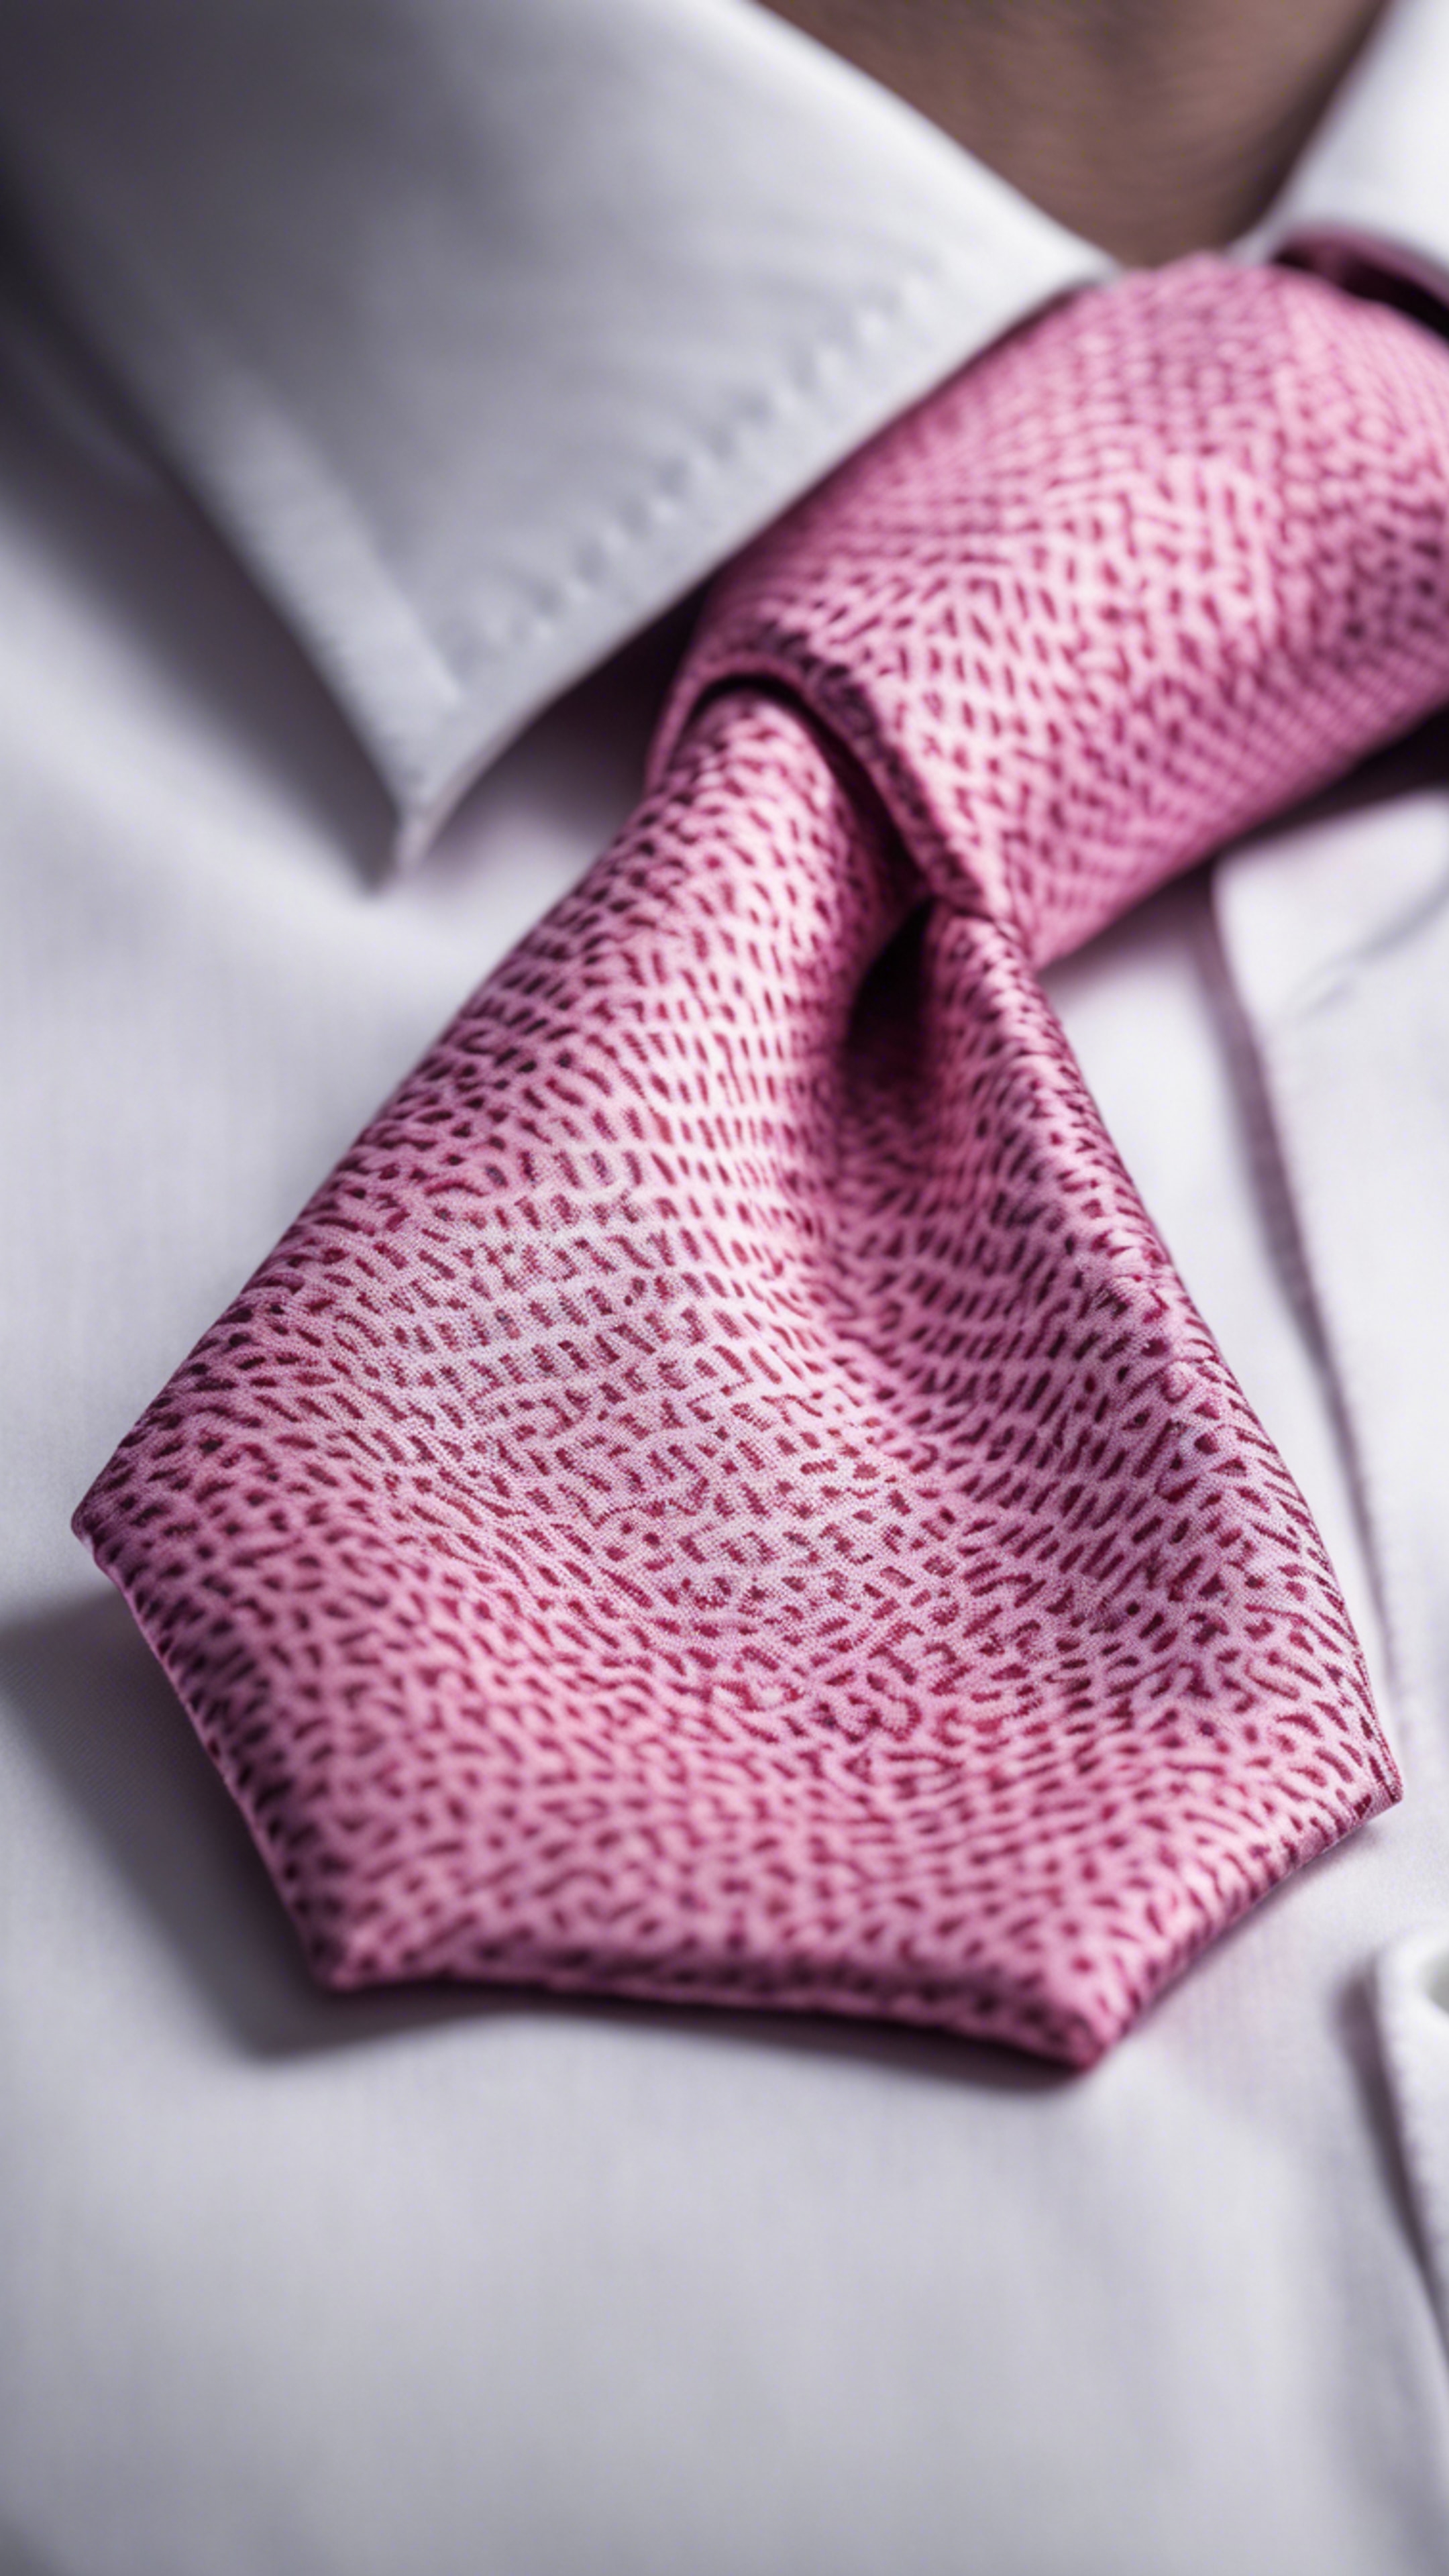 A pink patterned silk tie atop a clean, starched white shirt, representing preppy fashion. Tapeta[46ce982d17ca4b87a426]